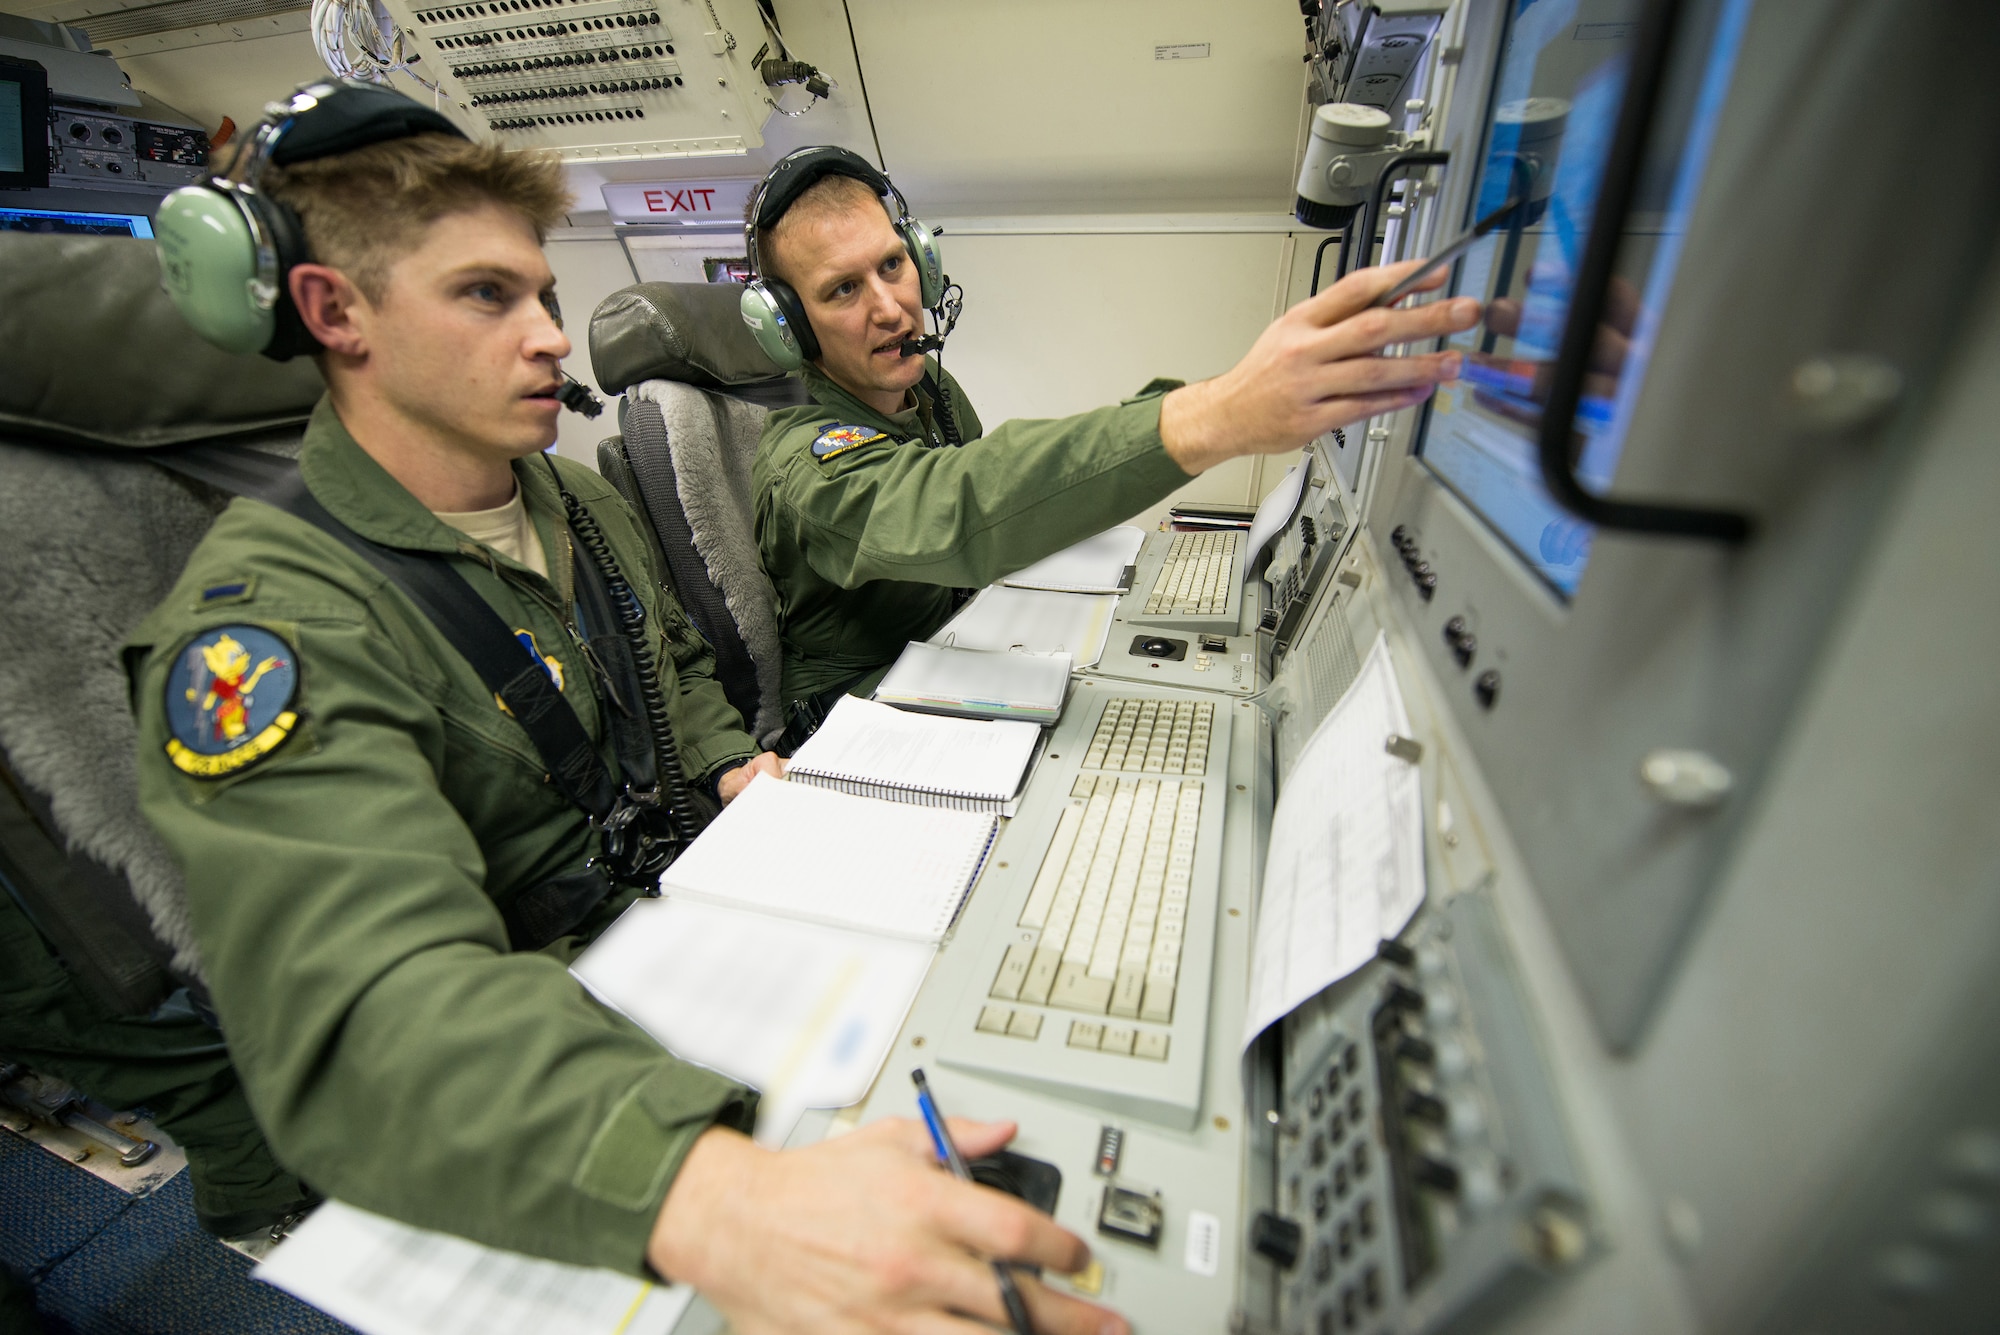 U.S. Air Force aircrew members with the 116th Air Control Wing, Georgia Air National Guard, monitor surveillance information during a mission aboard an E-8C Joint STARS (JSTARS), Robins Air Force Base, Ga., Nov. 15, 2014. The JSTARS platform provides wide-area, all-weather, surface surveillance radar that is used in a combat capacity supporting combatant commanders across the globe. They can also provide valuable data during domestic natural disasters; such as hurricanes and tornadoes, by communicating real-time geographic data to ground personnel to help safely evacuate citizens. (U.S. Air National Guard photo by Tech. Sgt. Regina Young/Released)(Portions of the photo have been blurred and names withheld for security purposes)